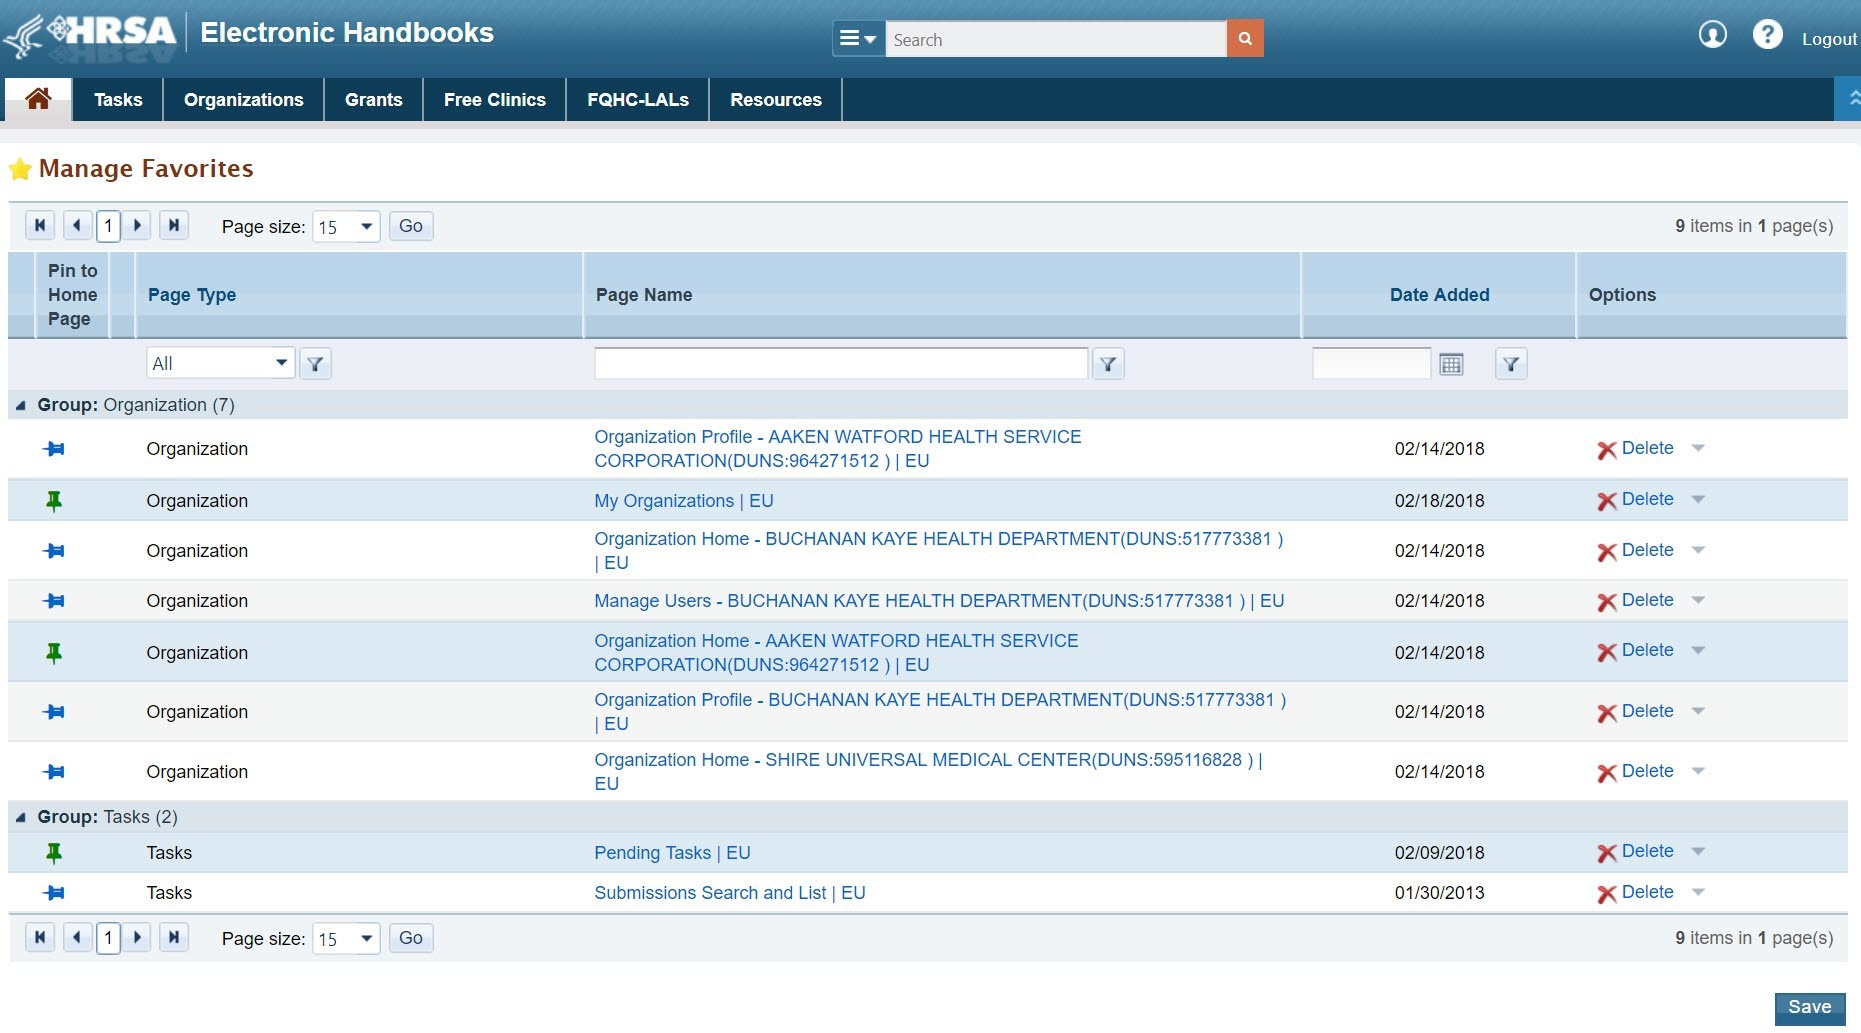 Image of Manage Favorites Page